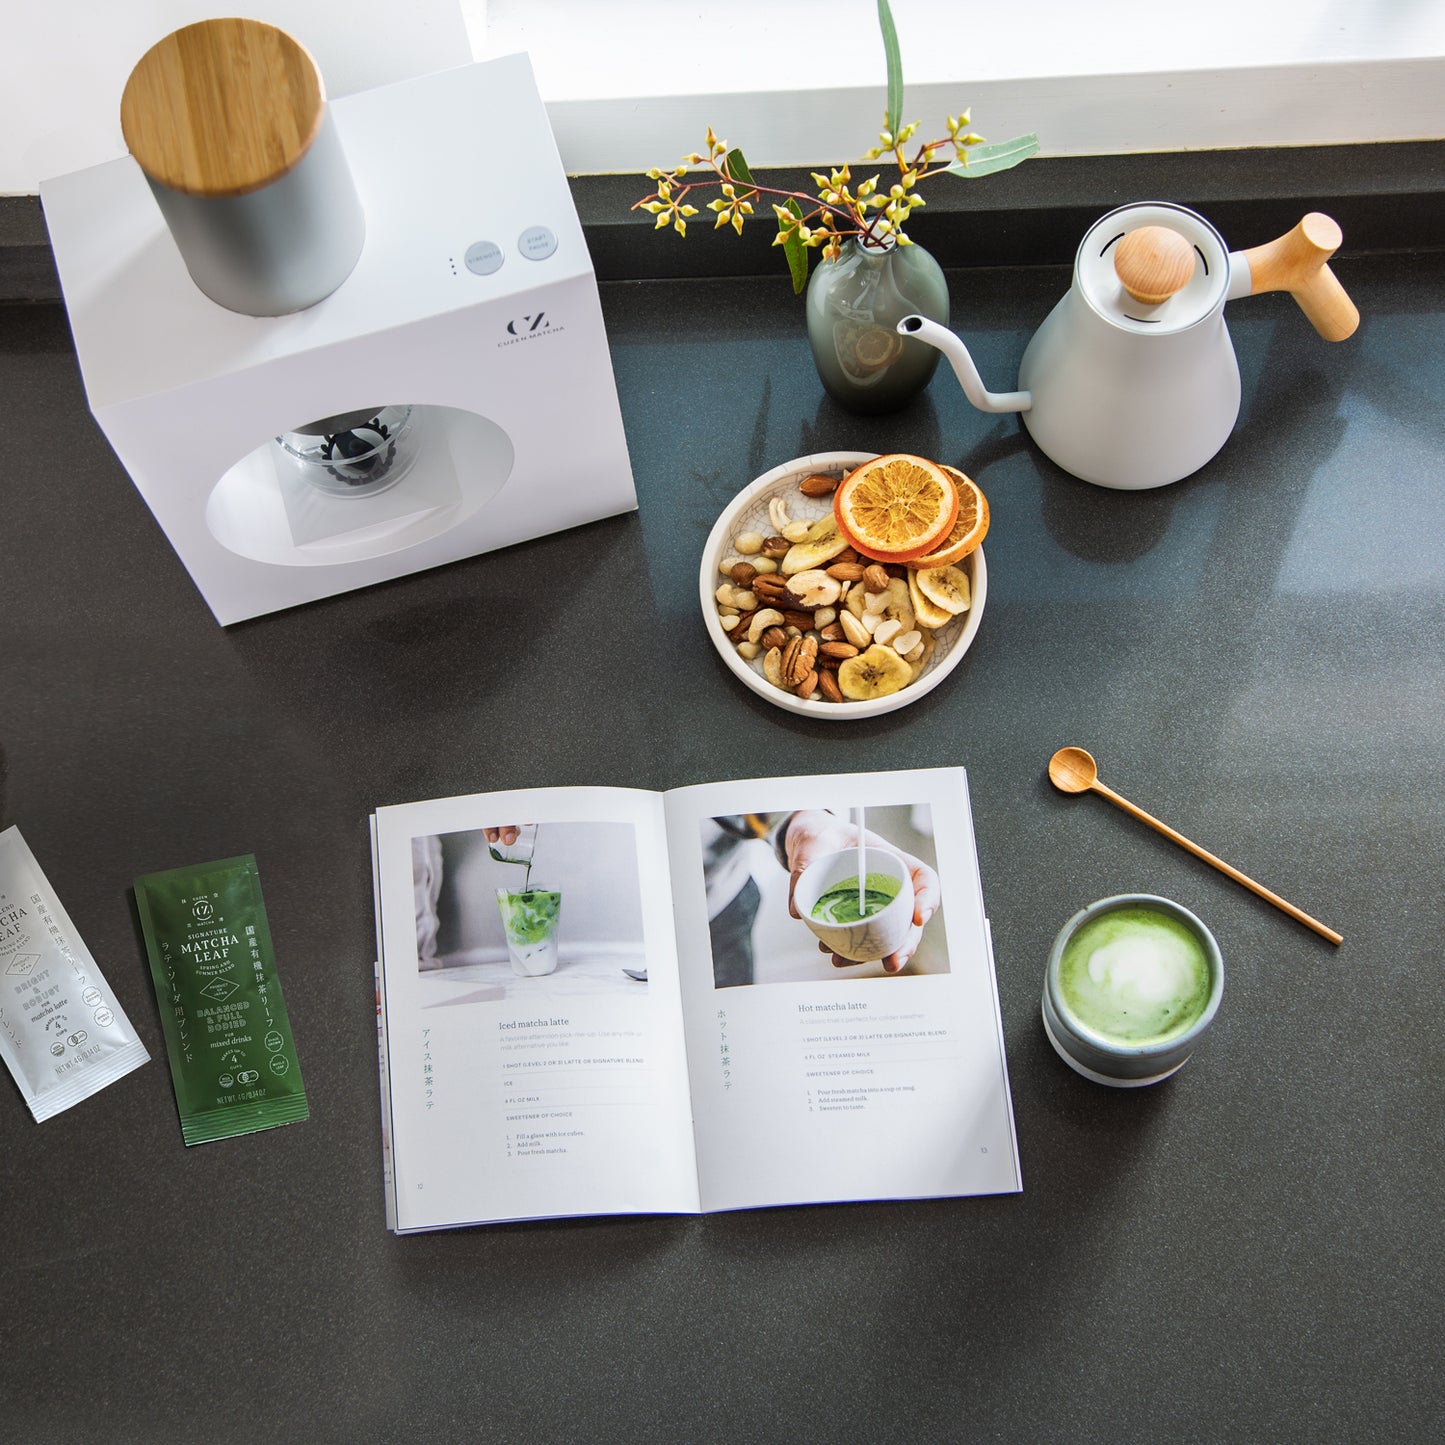 “A guide to your matcha moment” booklet, opened to matcha latte recipes, sitting next to a Matcha Maker.